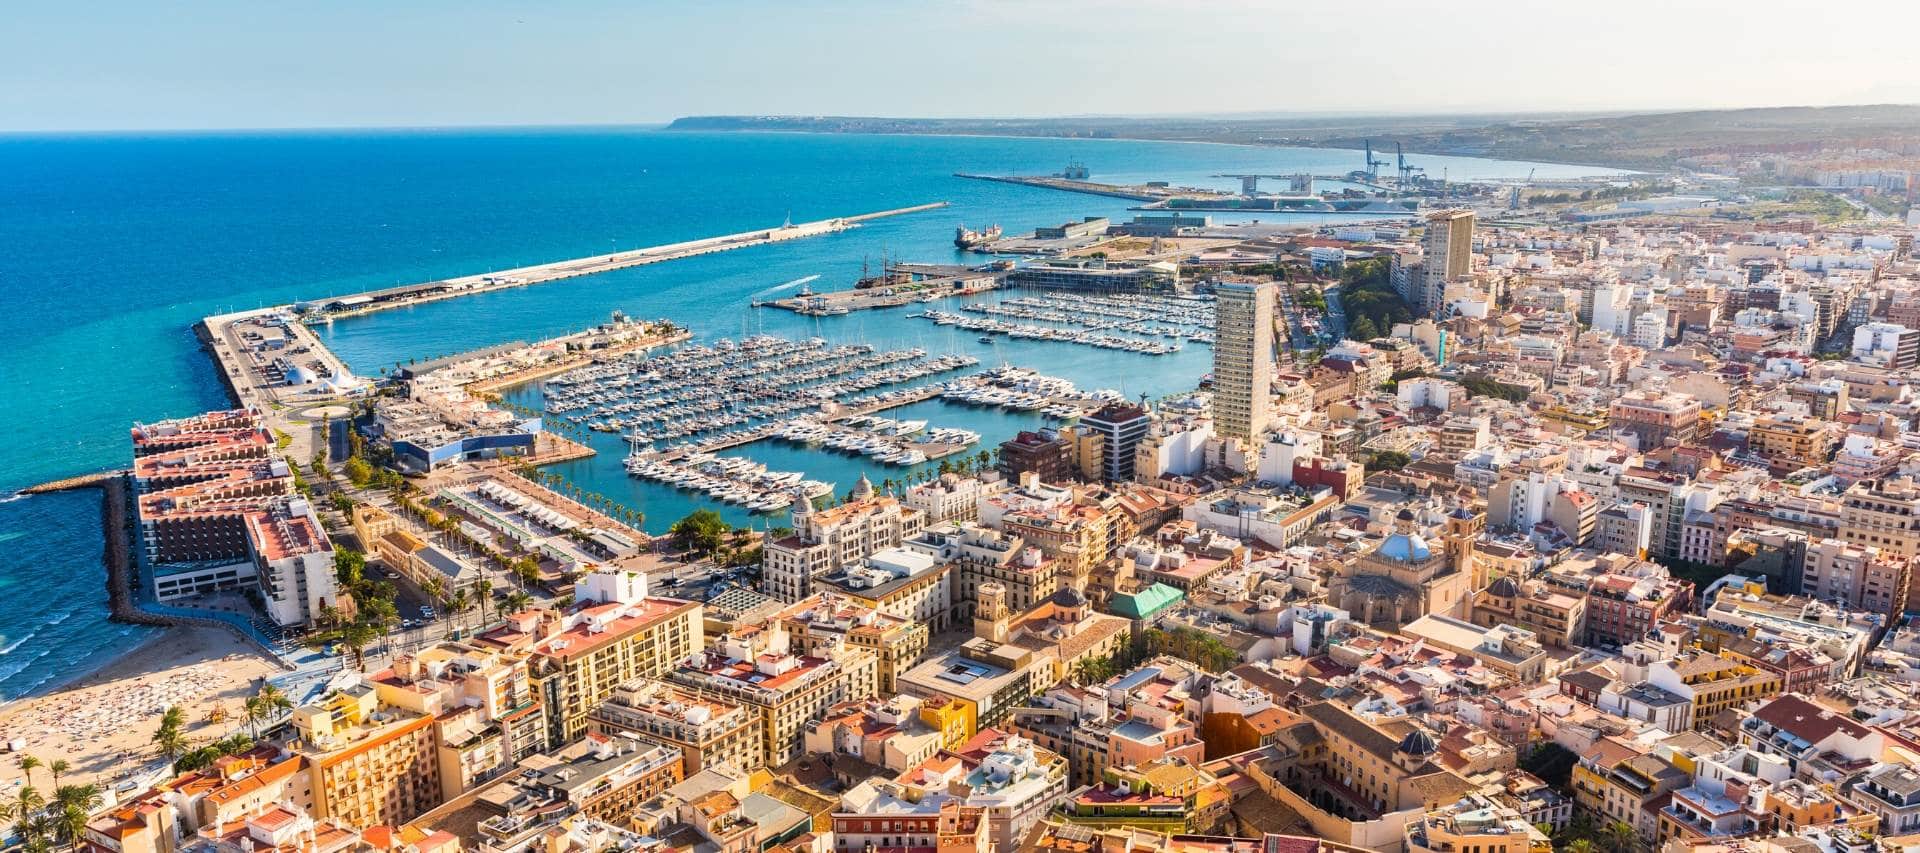 How to Spend the Perfect Weekend in Alicante